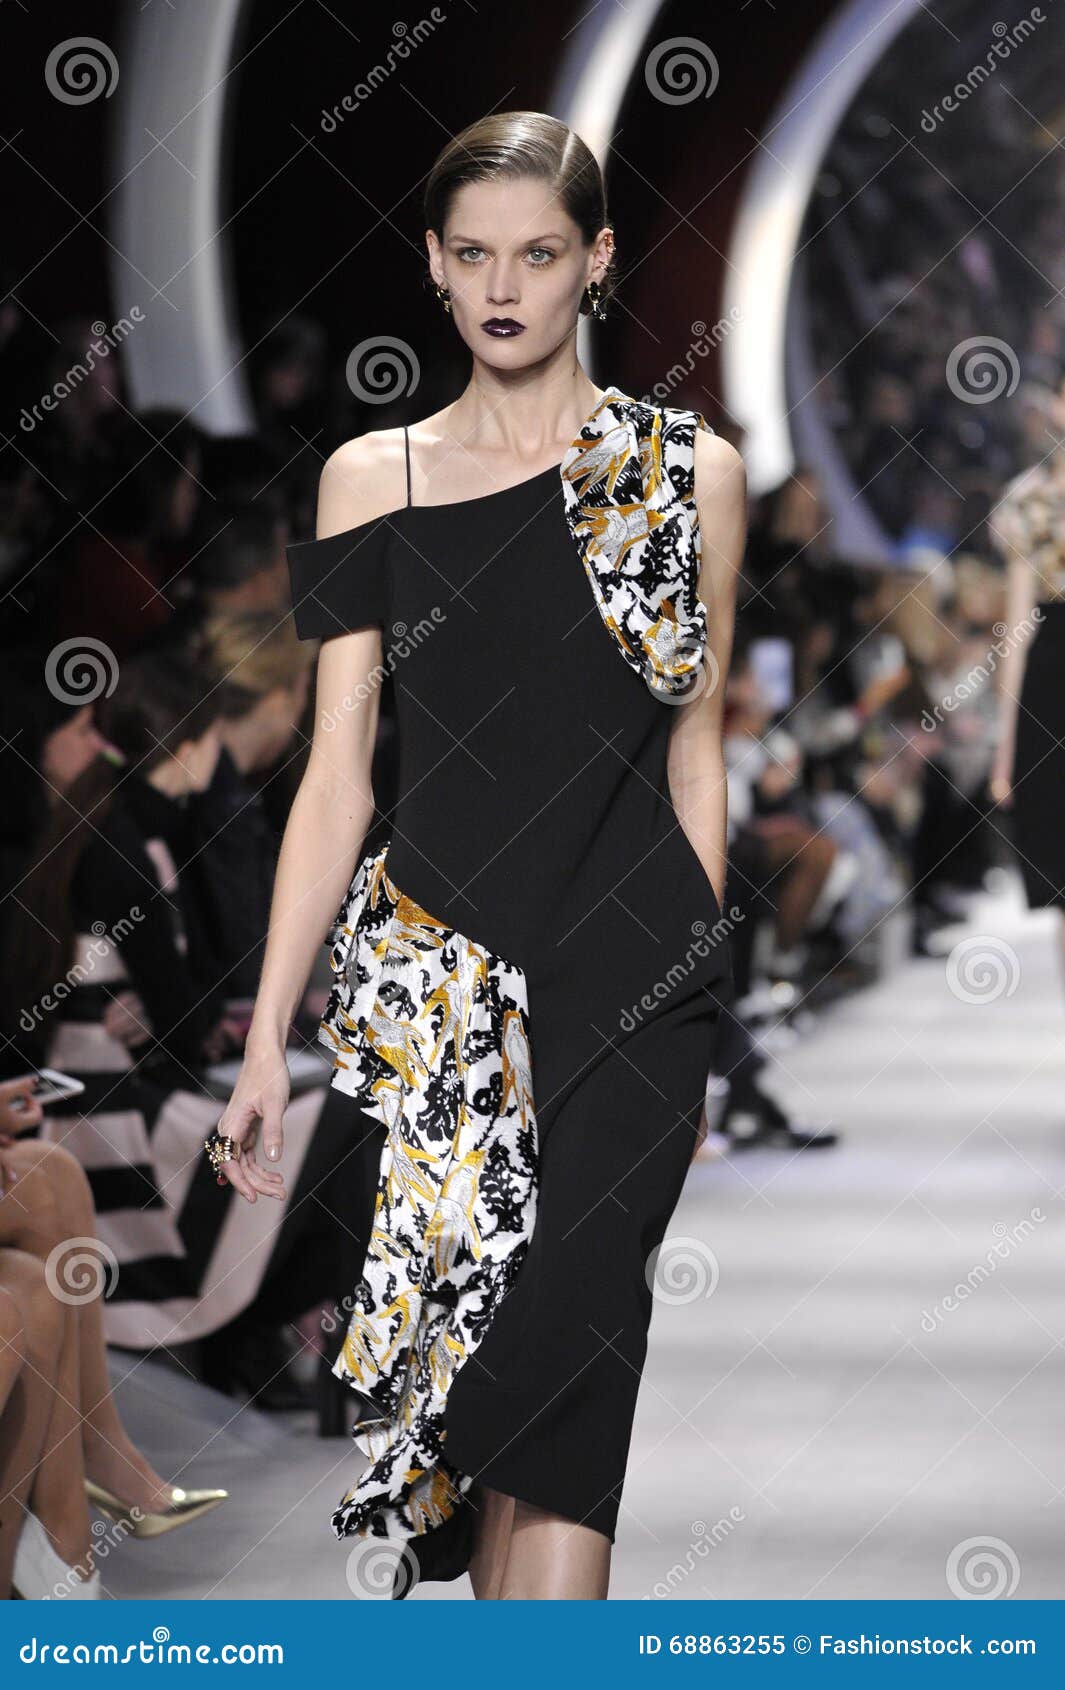 A Model Walks the Runway during the Christian Dior Show Editorial Image ...